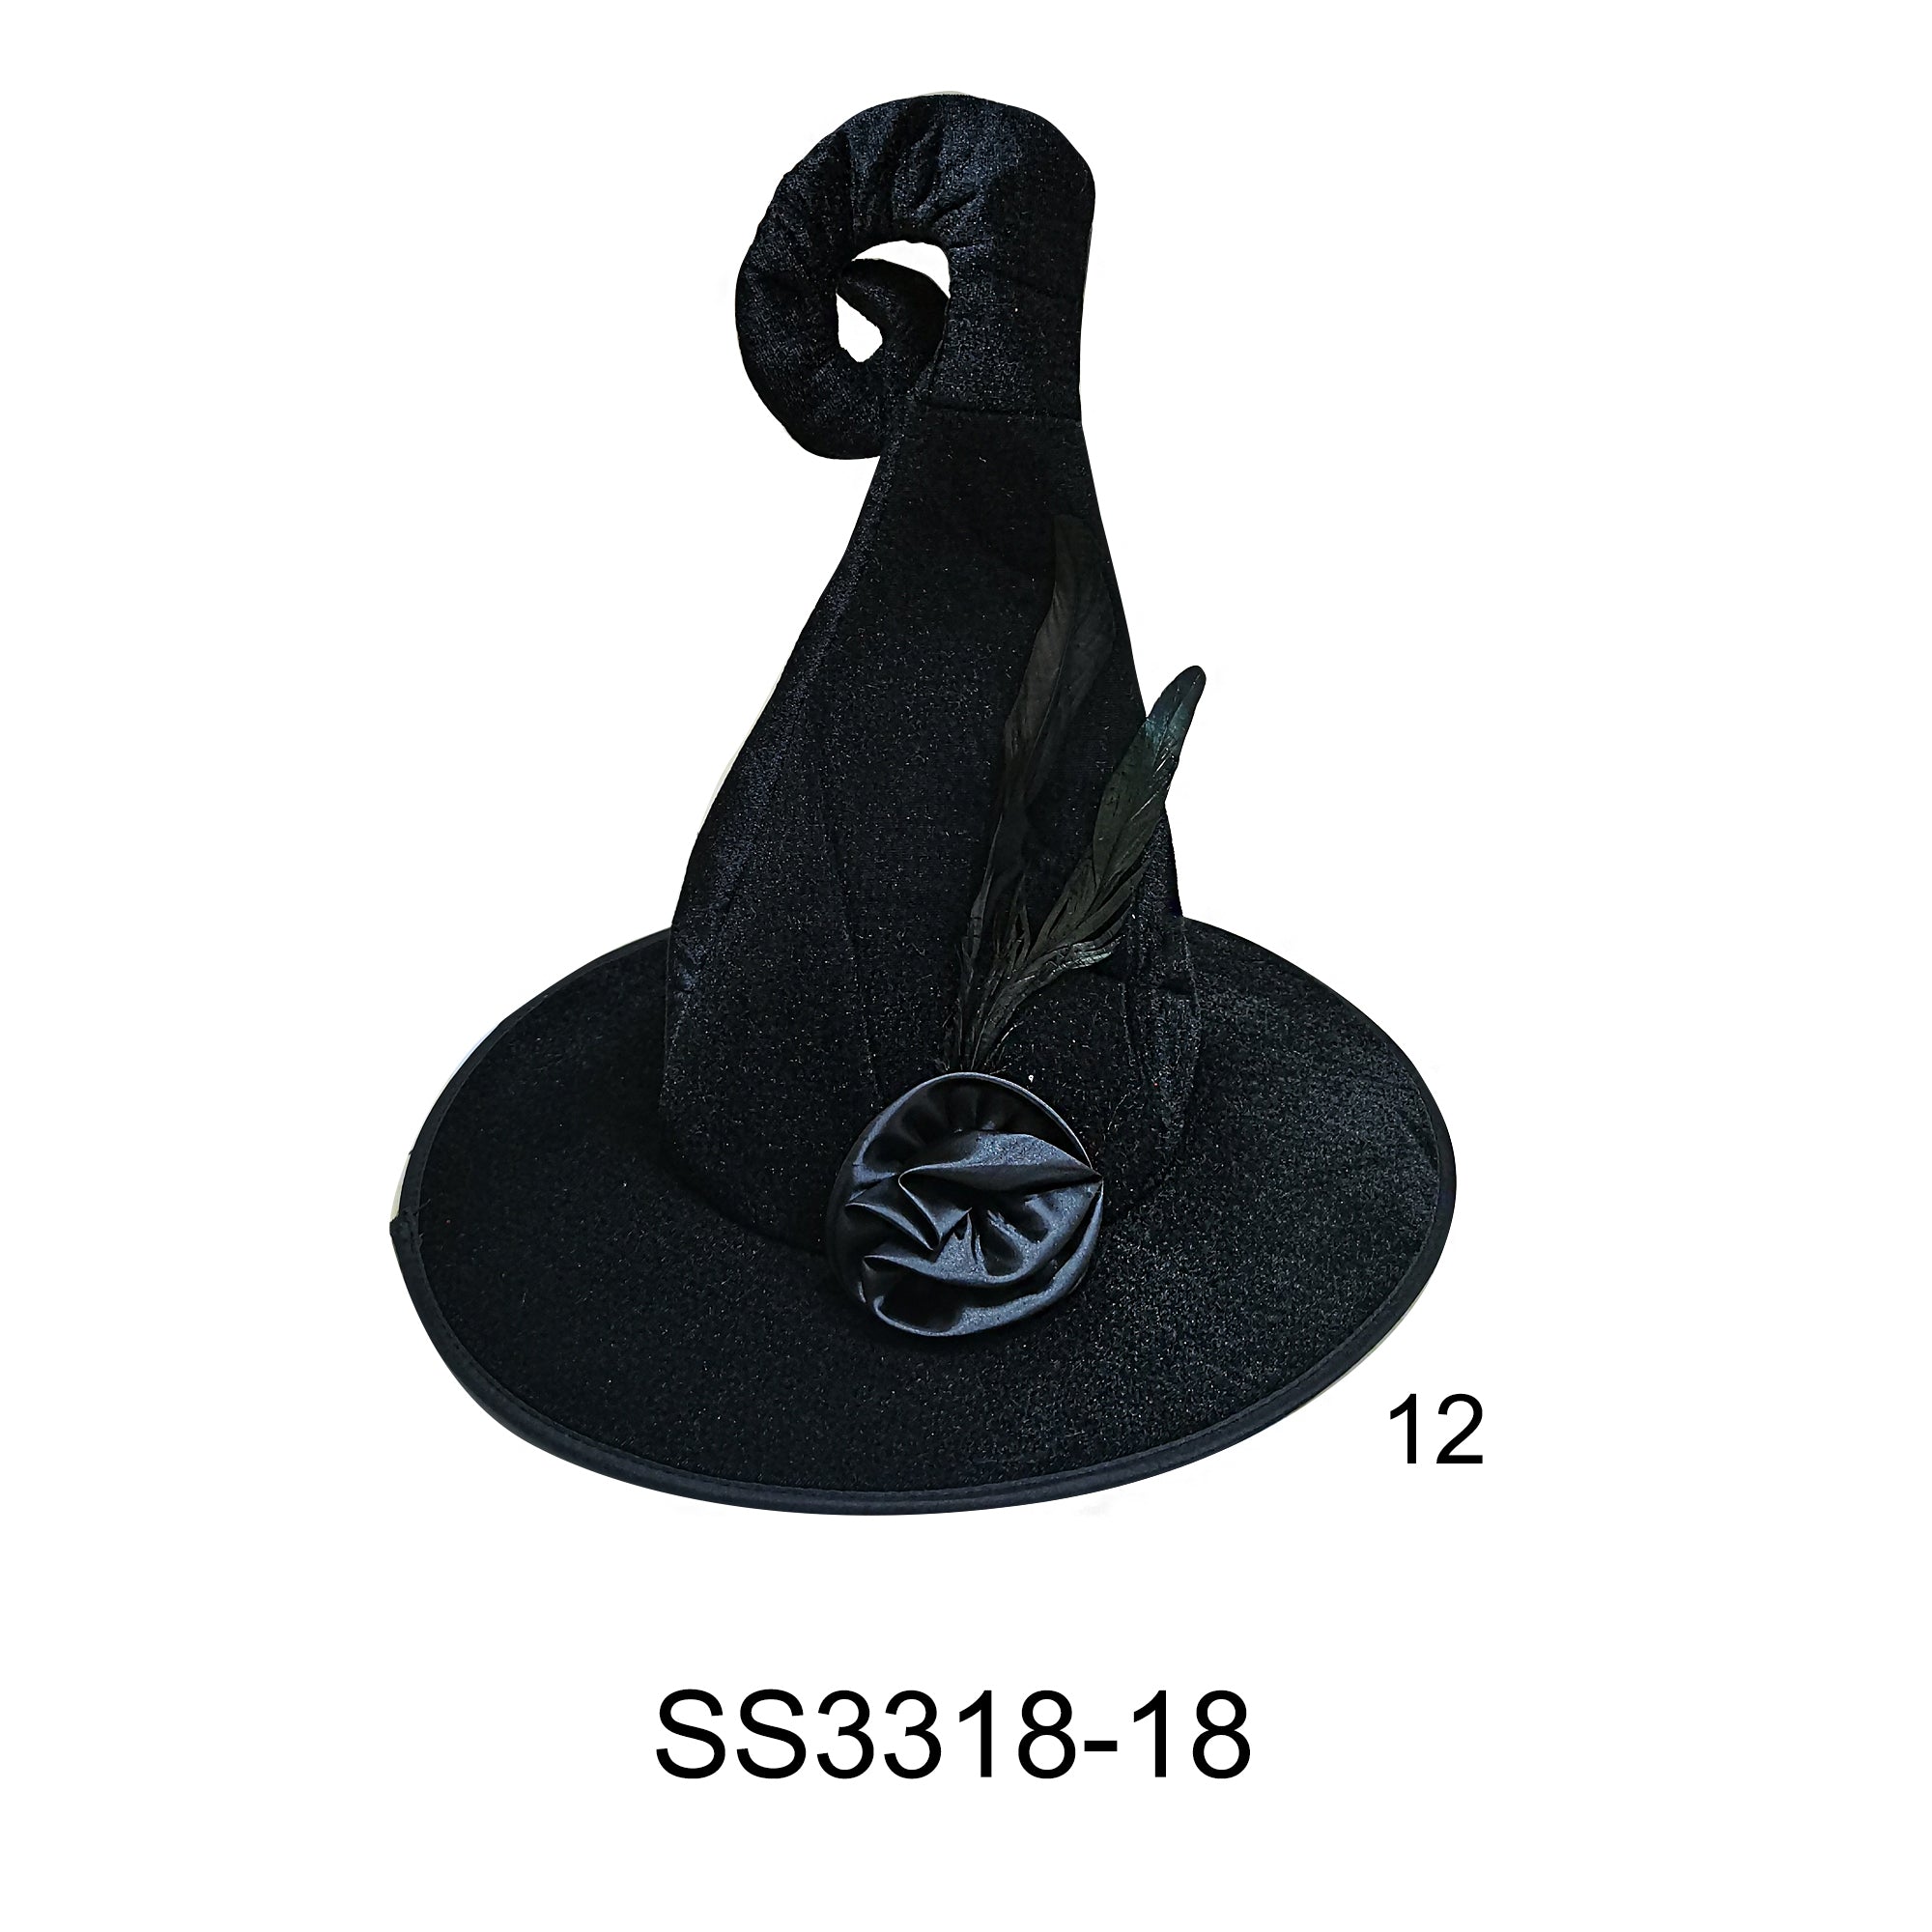 WITHCH BLACK PARTY HAT 3318-18 (6PC)